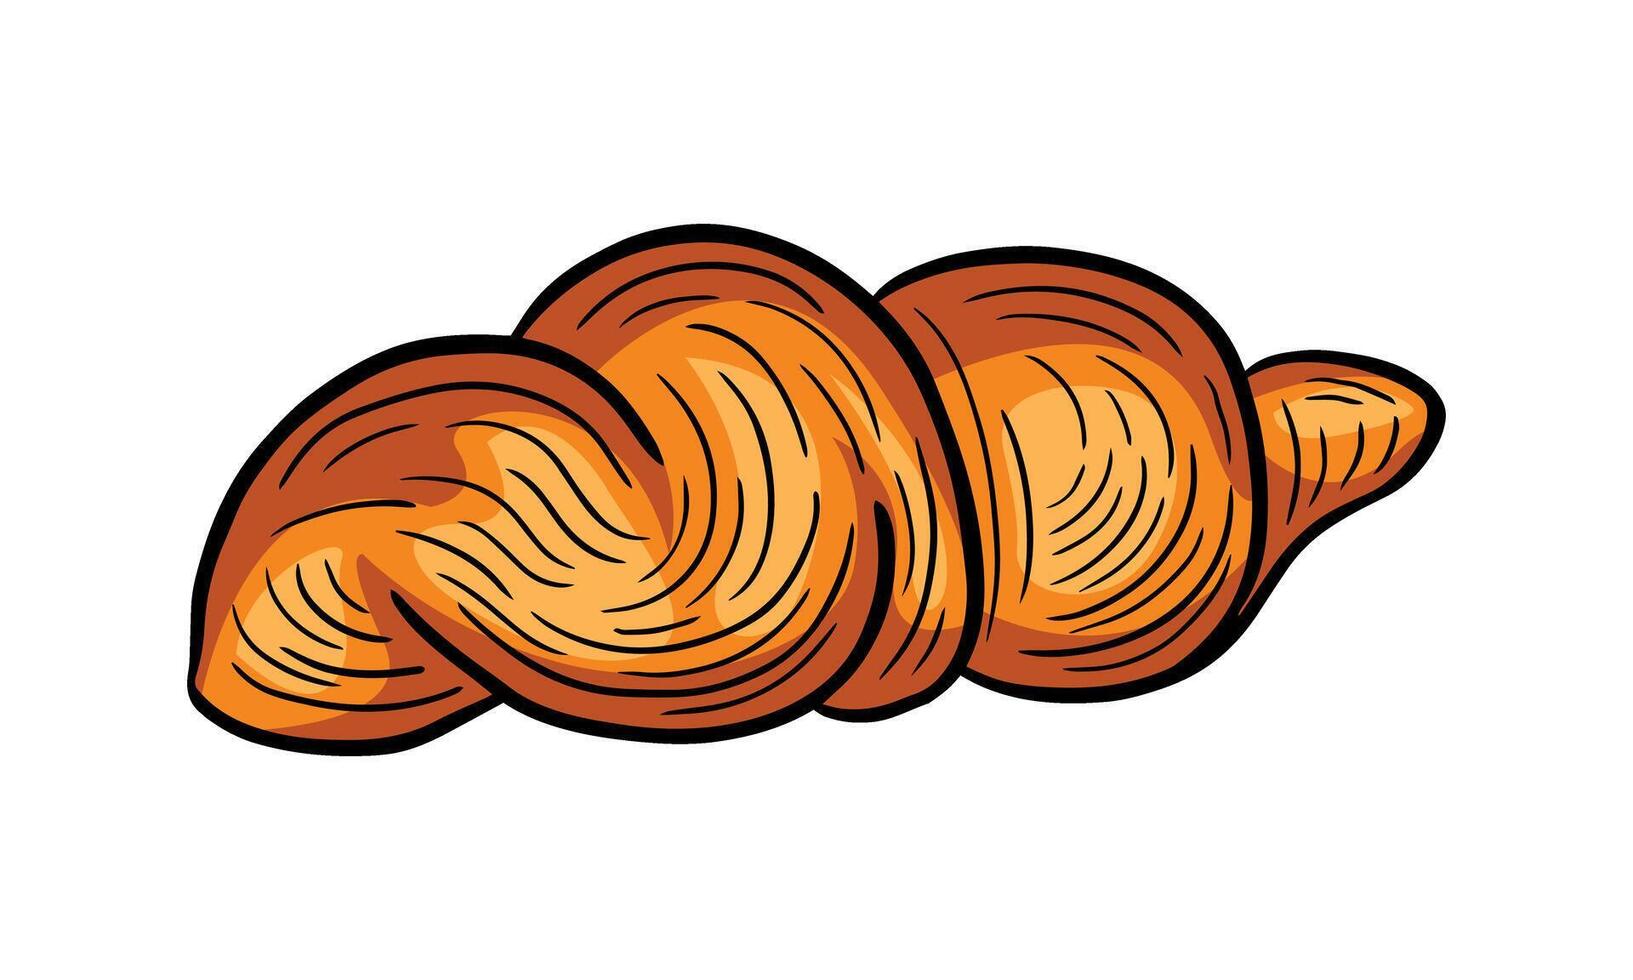 croissant hand drawn engraved sketch drawing vector